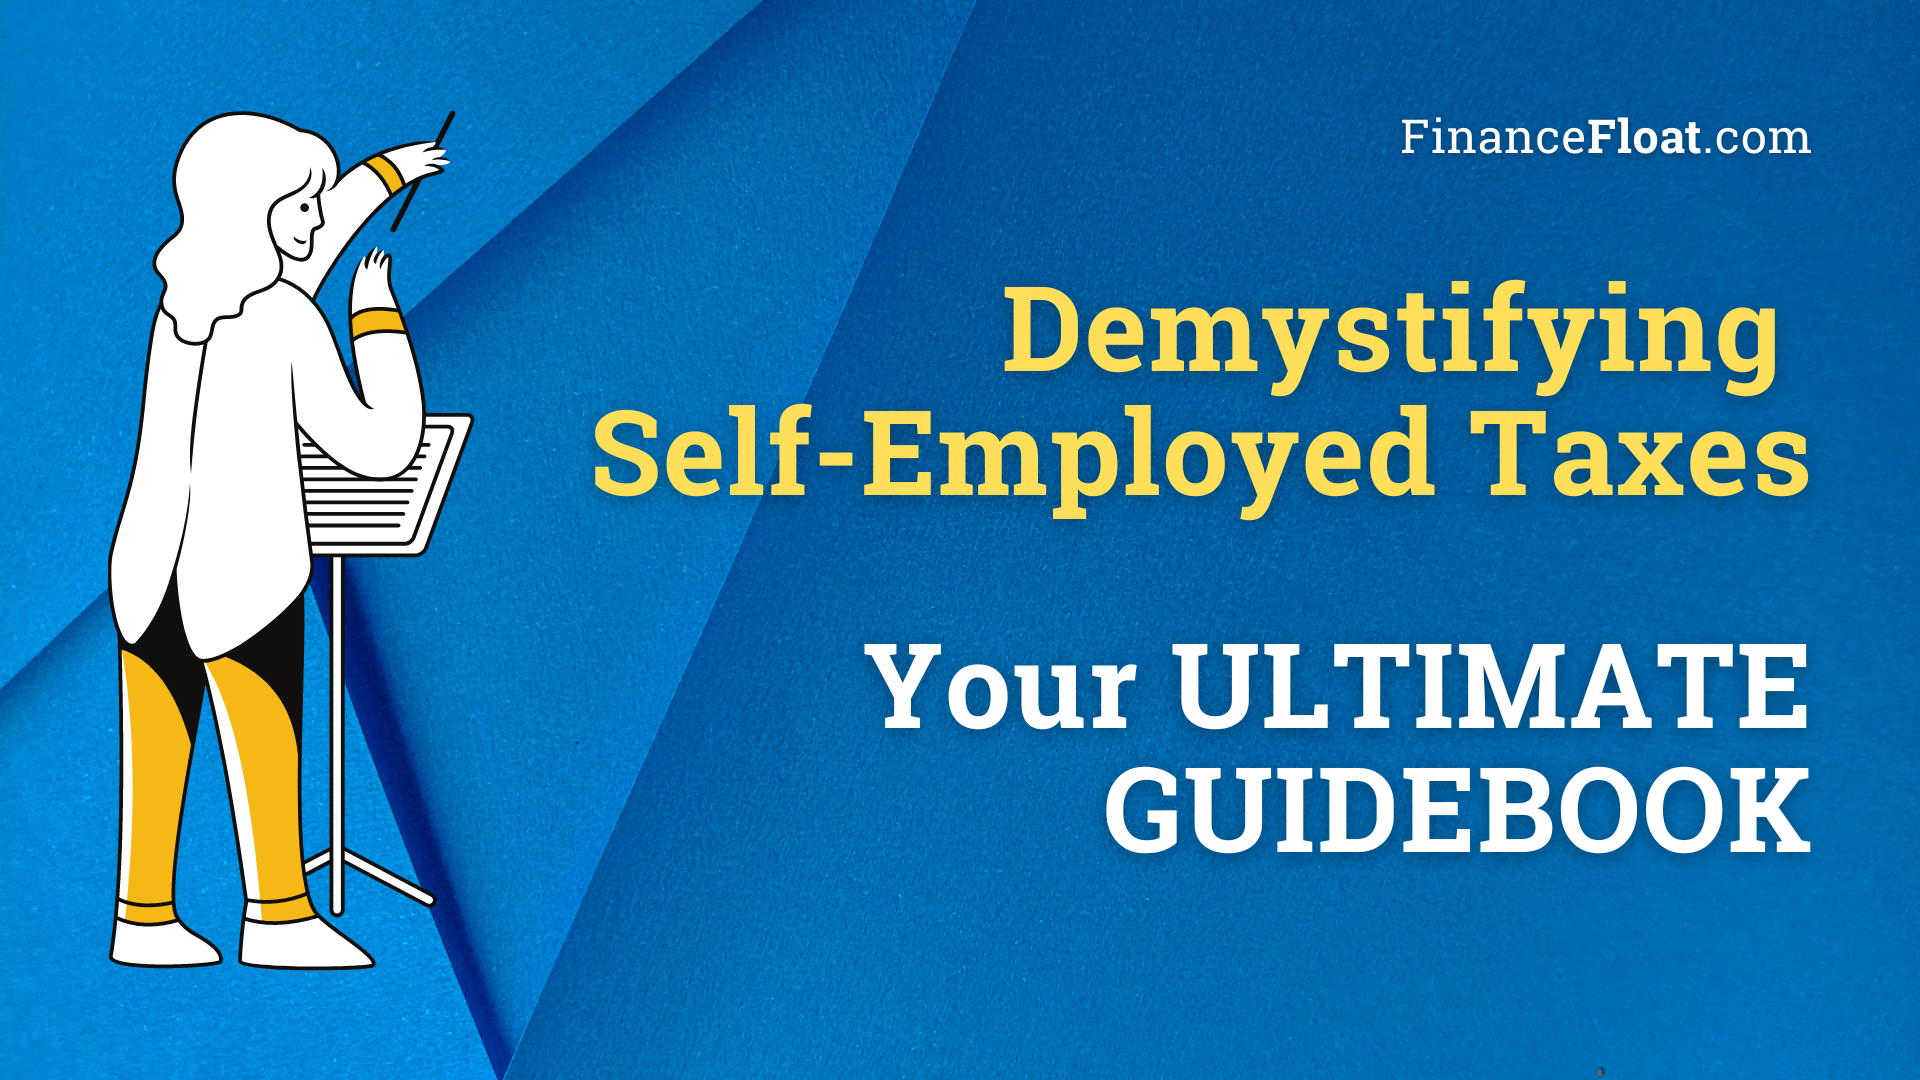 Demystifying Self-Employed Taxes Your ULTIMATE GUIDEBOOK